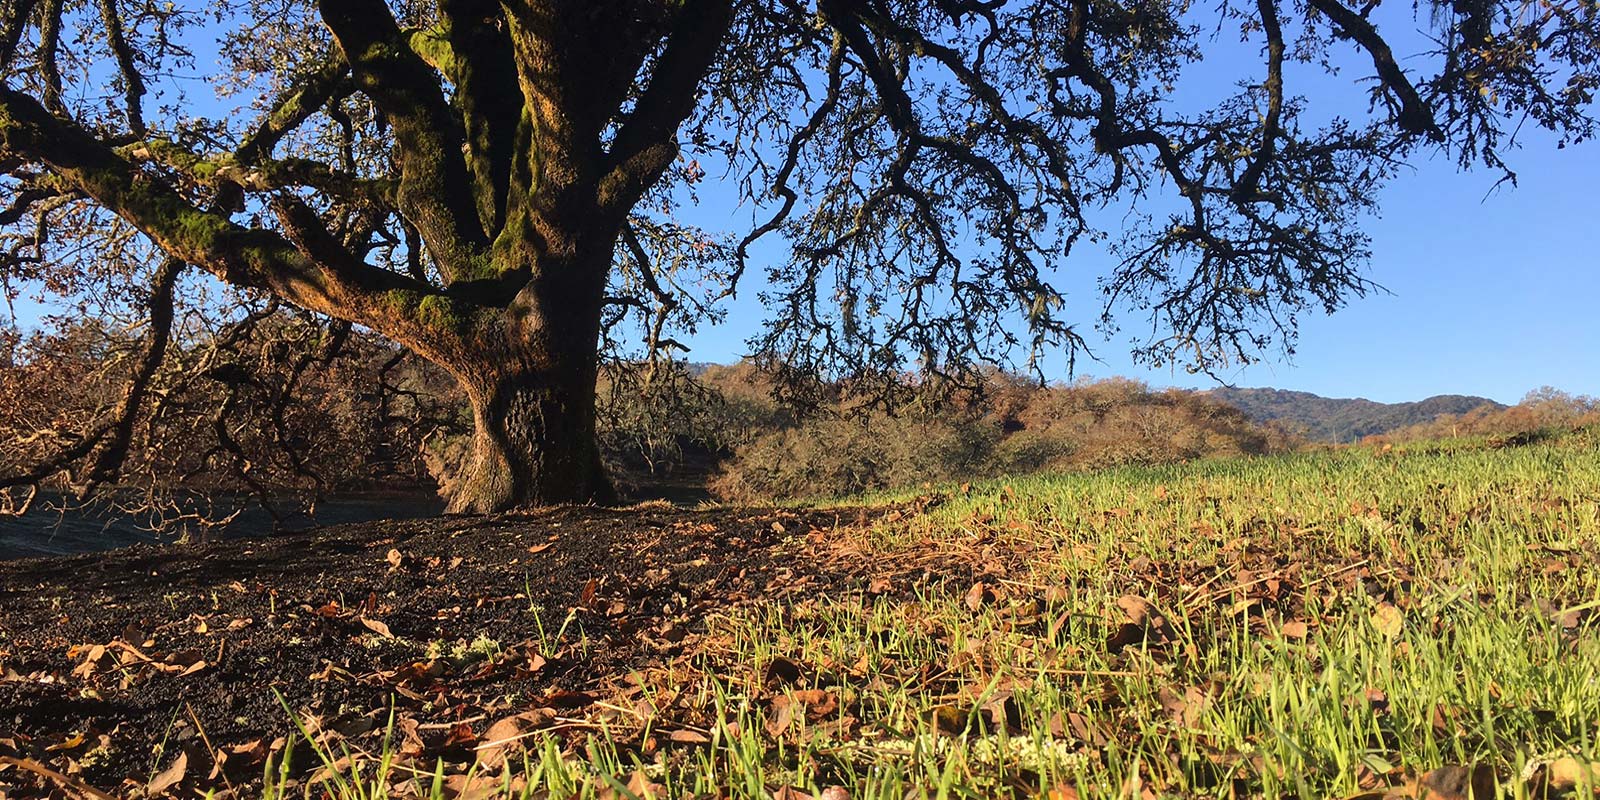 Fire recovery at Sonoma Valley Regional Park